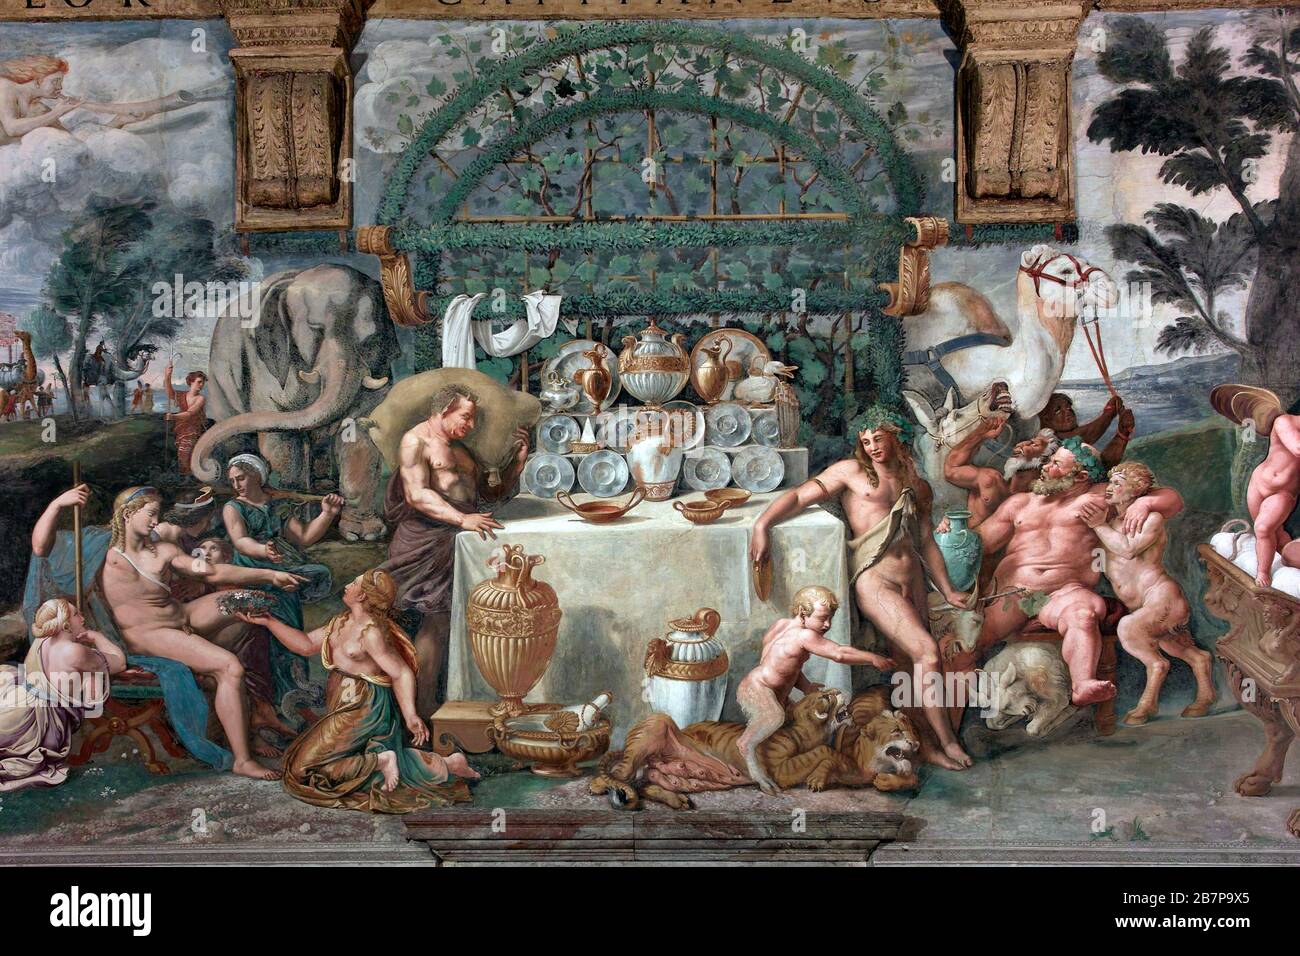 "Banquet of the gods" in the "Chamber of Cupid and Psyche". Fresco by Giulio Romano and helpers (16th century) inside Palazzo Te, Mantua, Lombardy, It Stock Photo